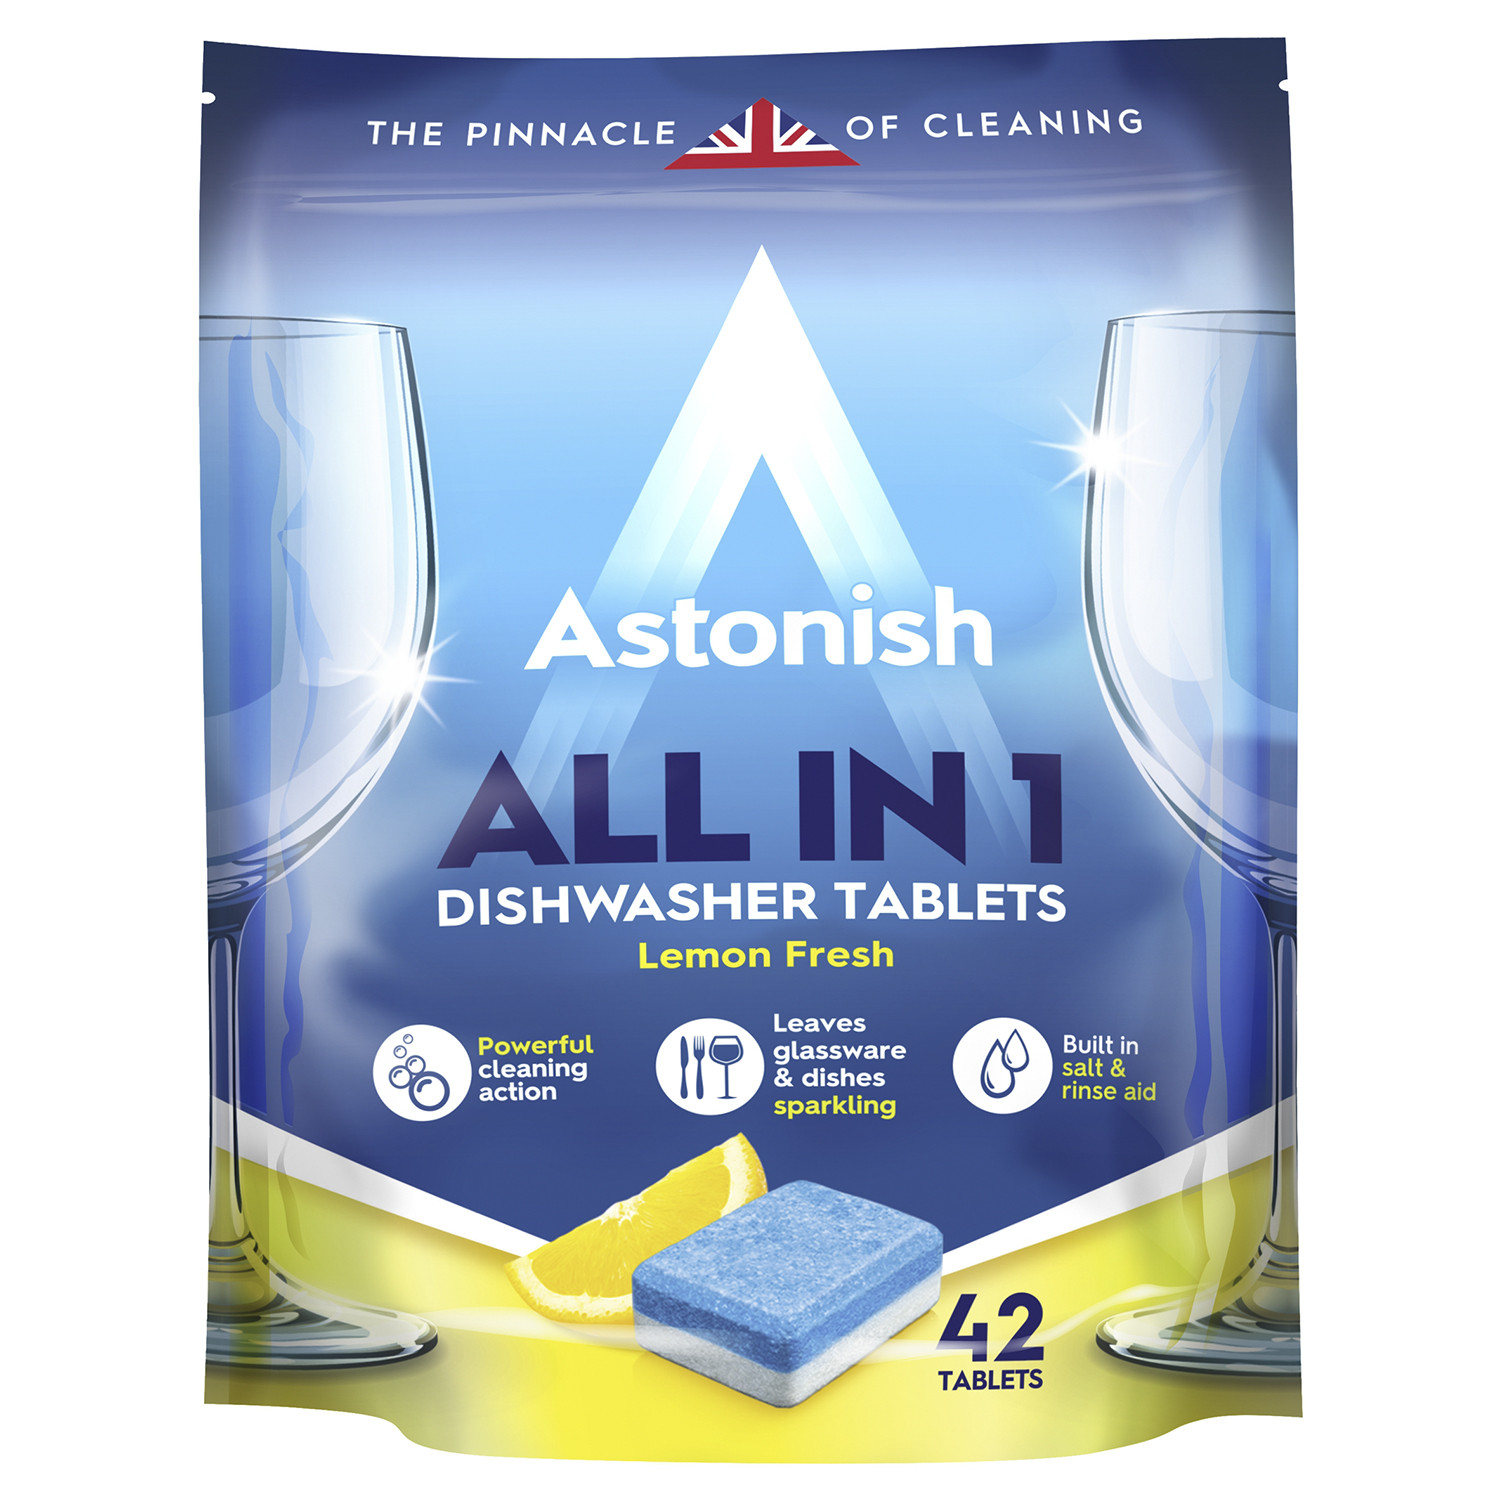 Astonish All in 1 Dishwasher Tablets 42 Pack Image